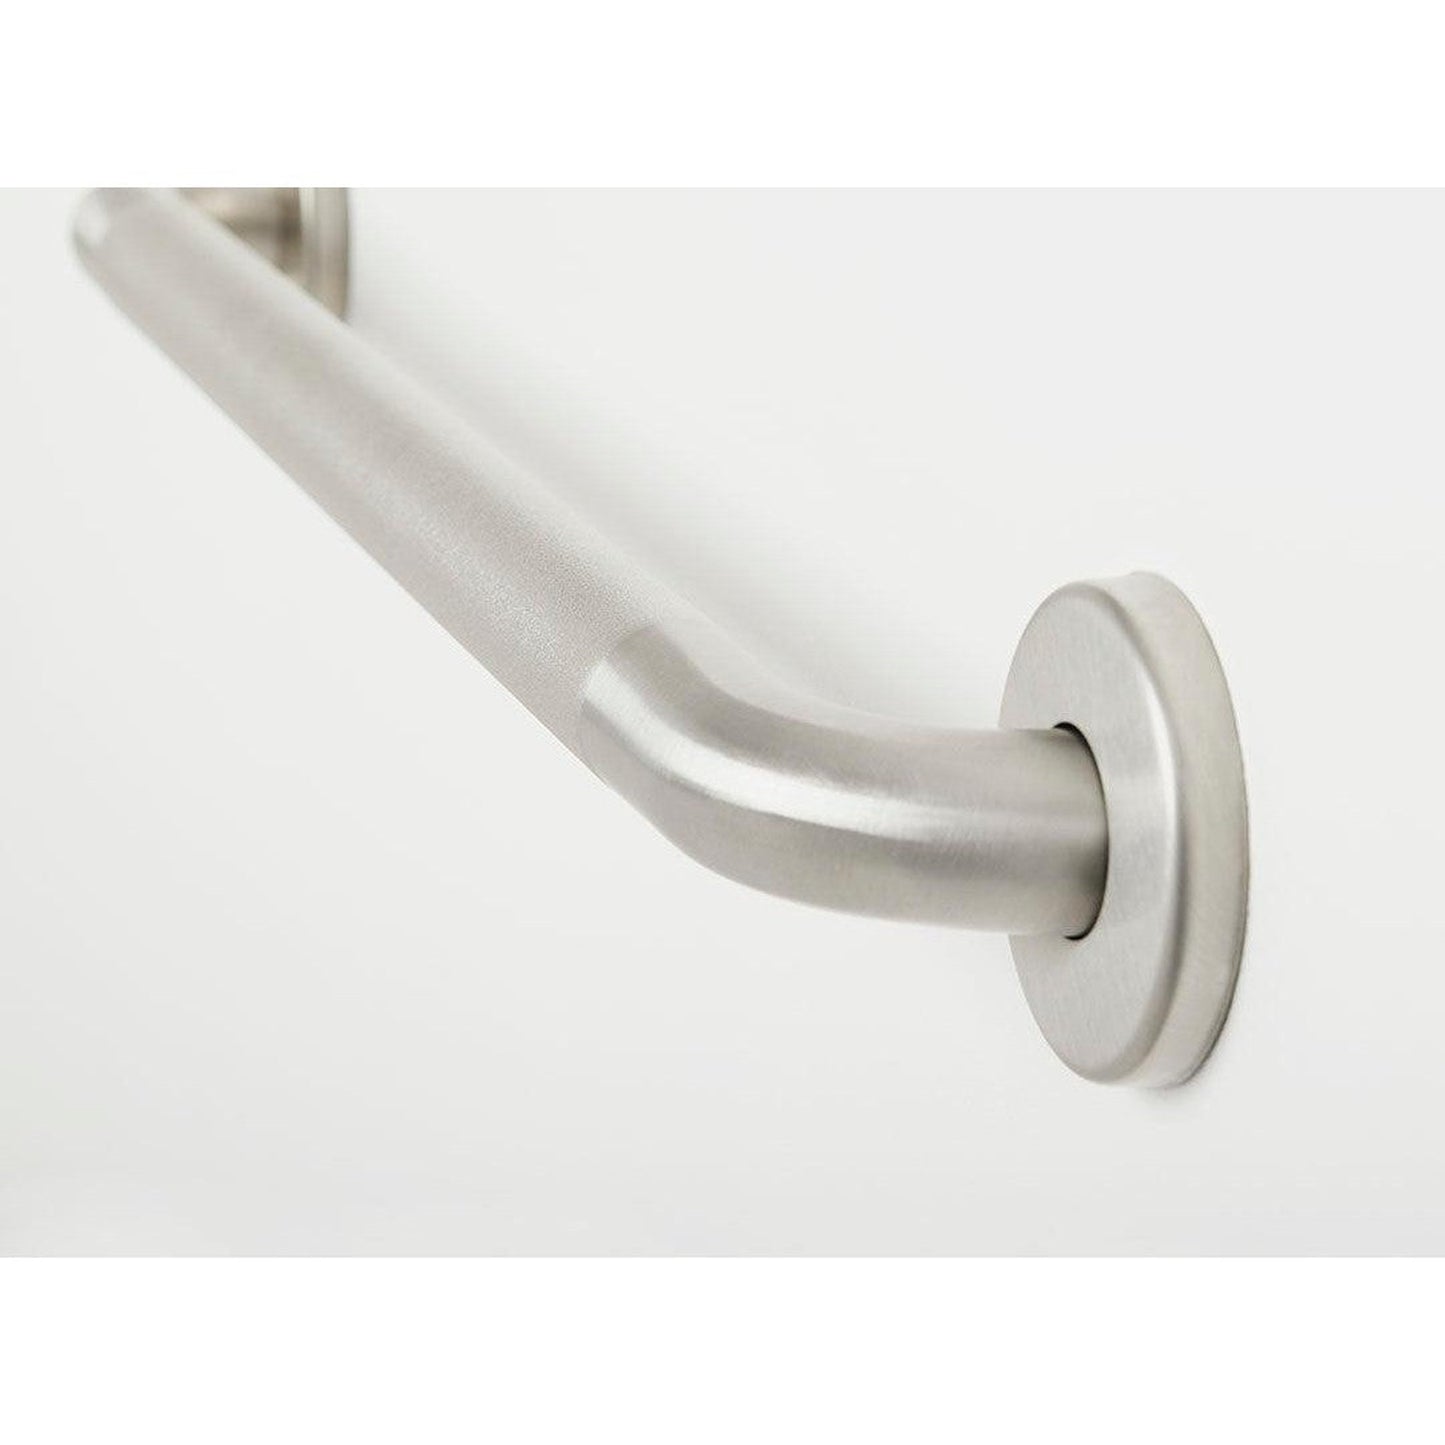 Seachrome Signature Series Value Line 48" Peened Stainless Steel With Satin Ends 1.25" Tube Diameter Straight Concealed Flange Grab Bar